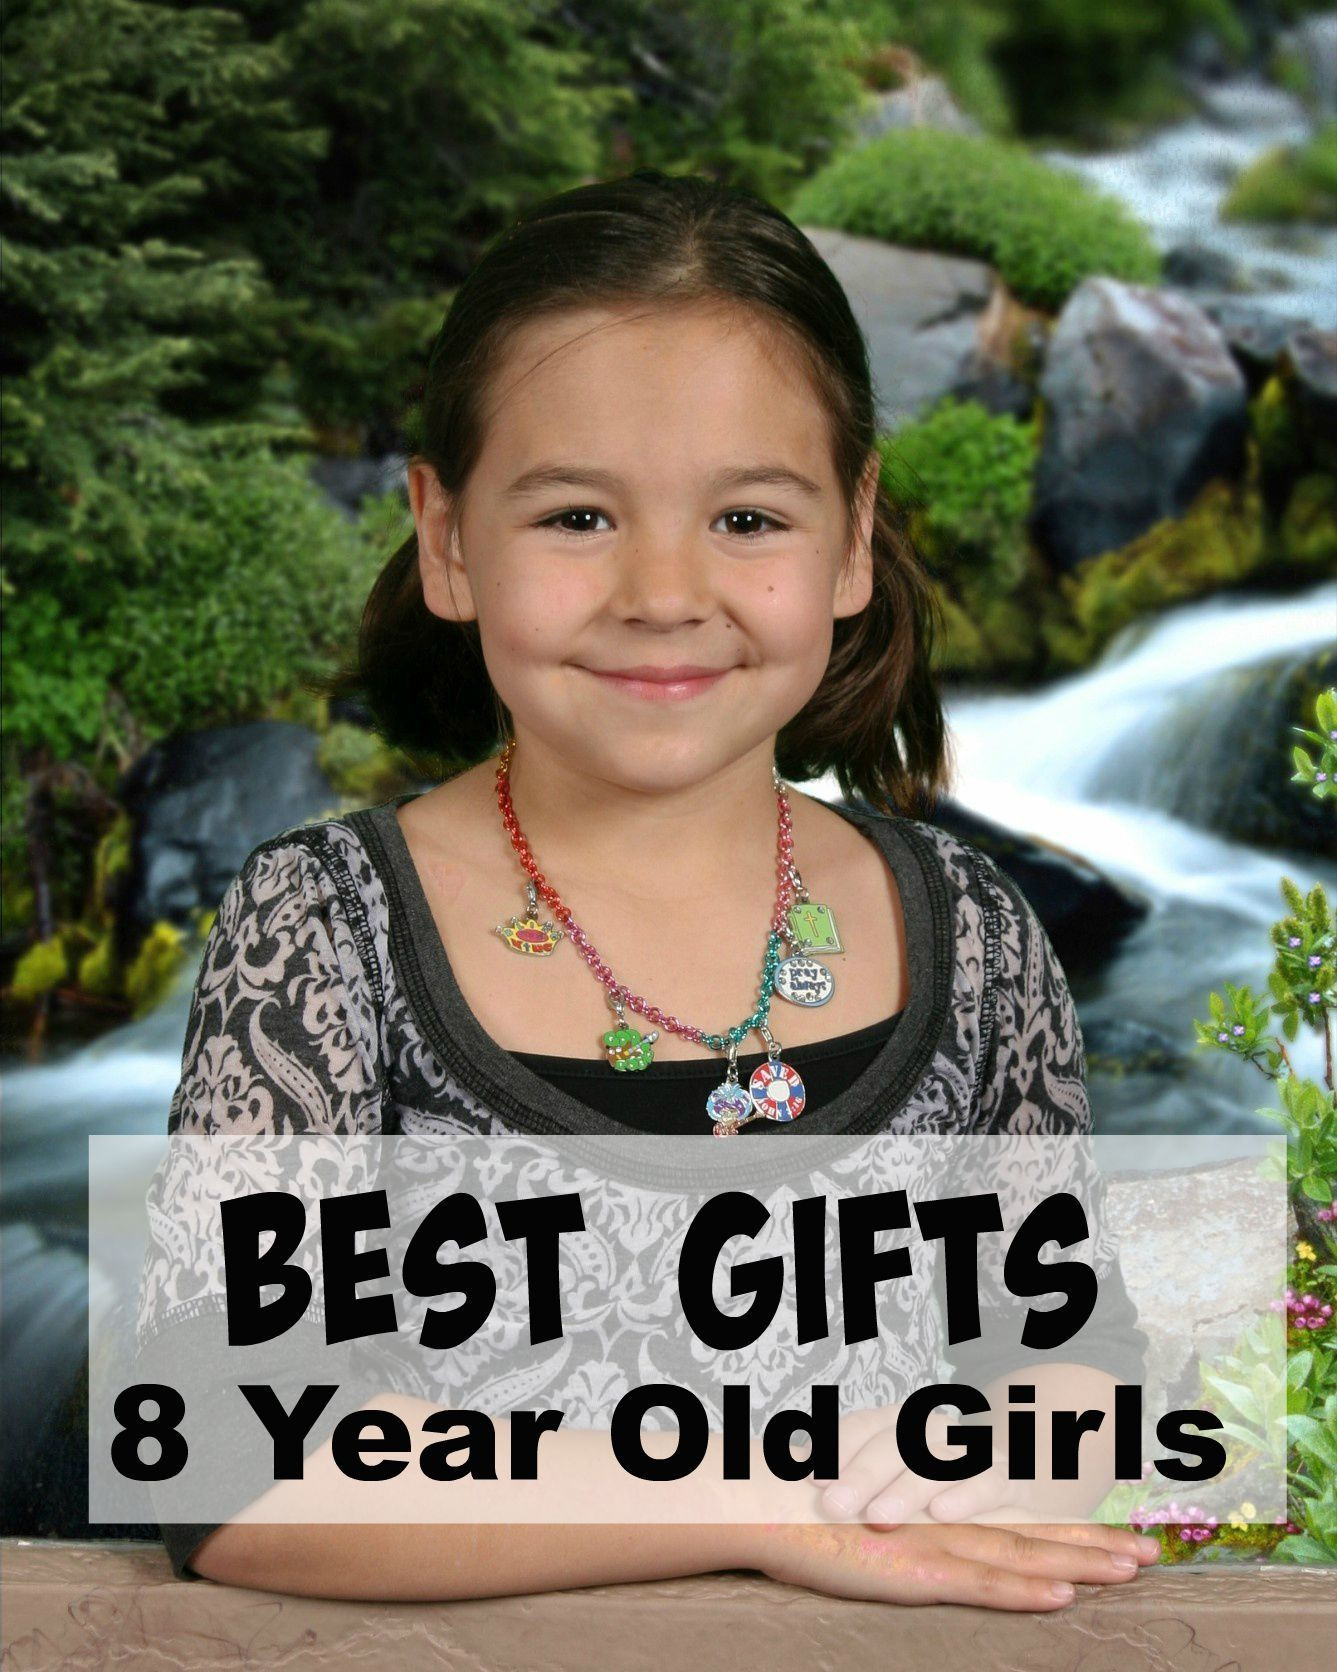 Birthday Gift For 8 Year Old Girl
 25 Spectacular Gift Ideas For 8 Year Old Girls That WILL